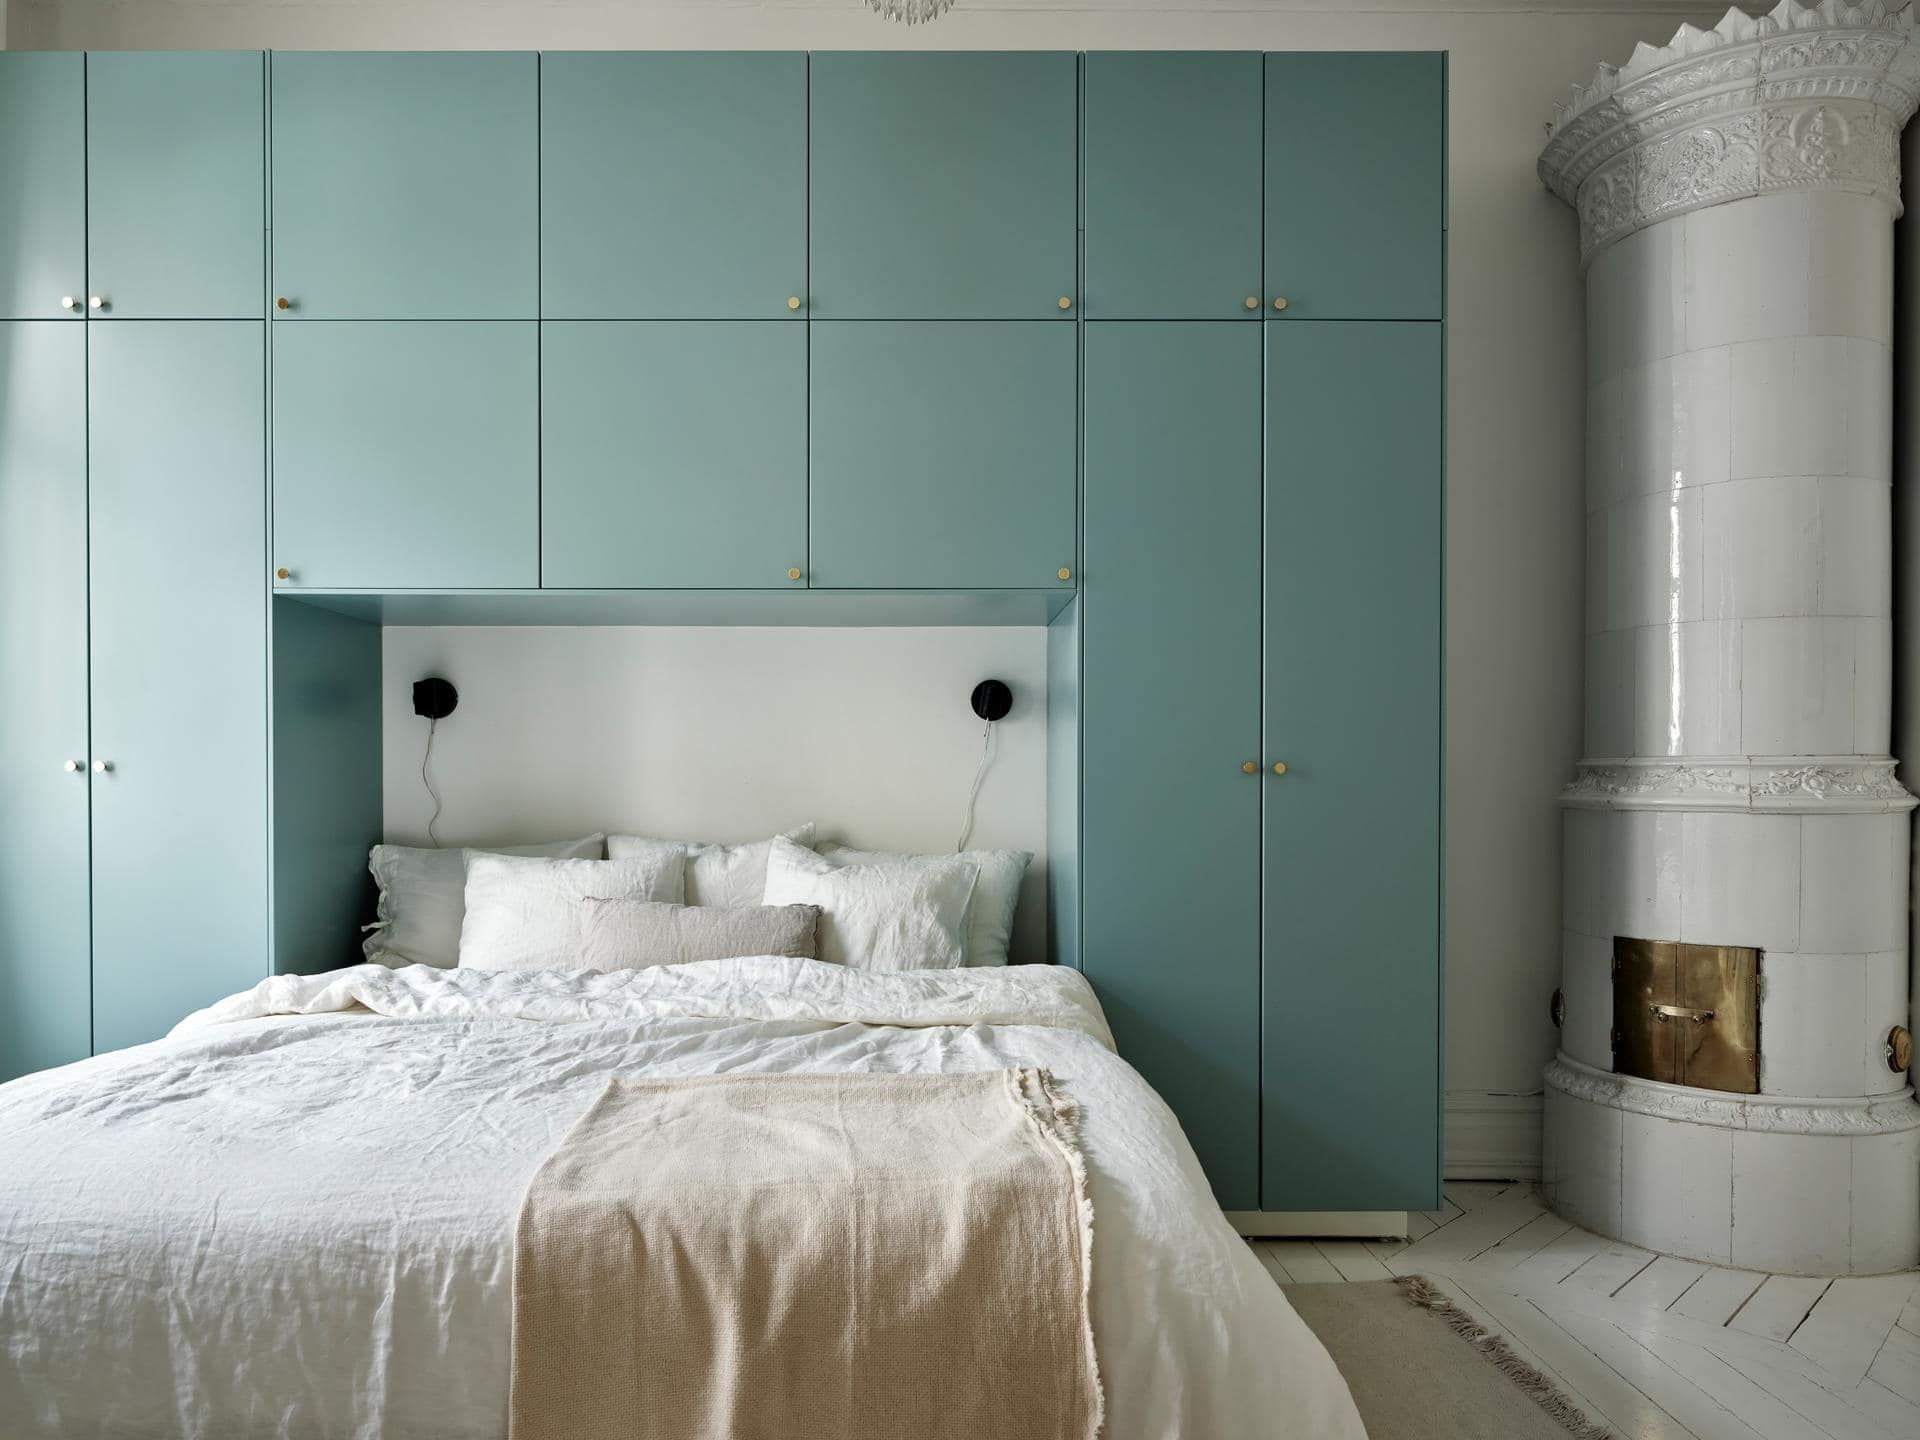 18 Built In Wardrobe Ideas Around A Bed – Coco Lapine Designcoco Lapine  Design Inside Wardrobes Beds (View 9 of 20)